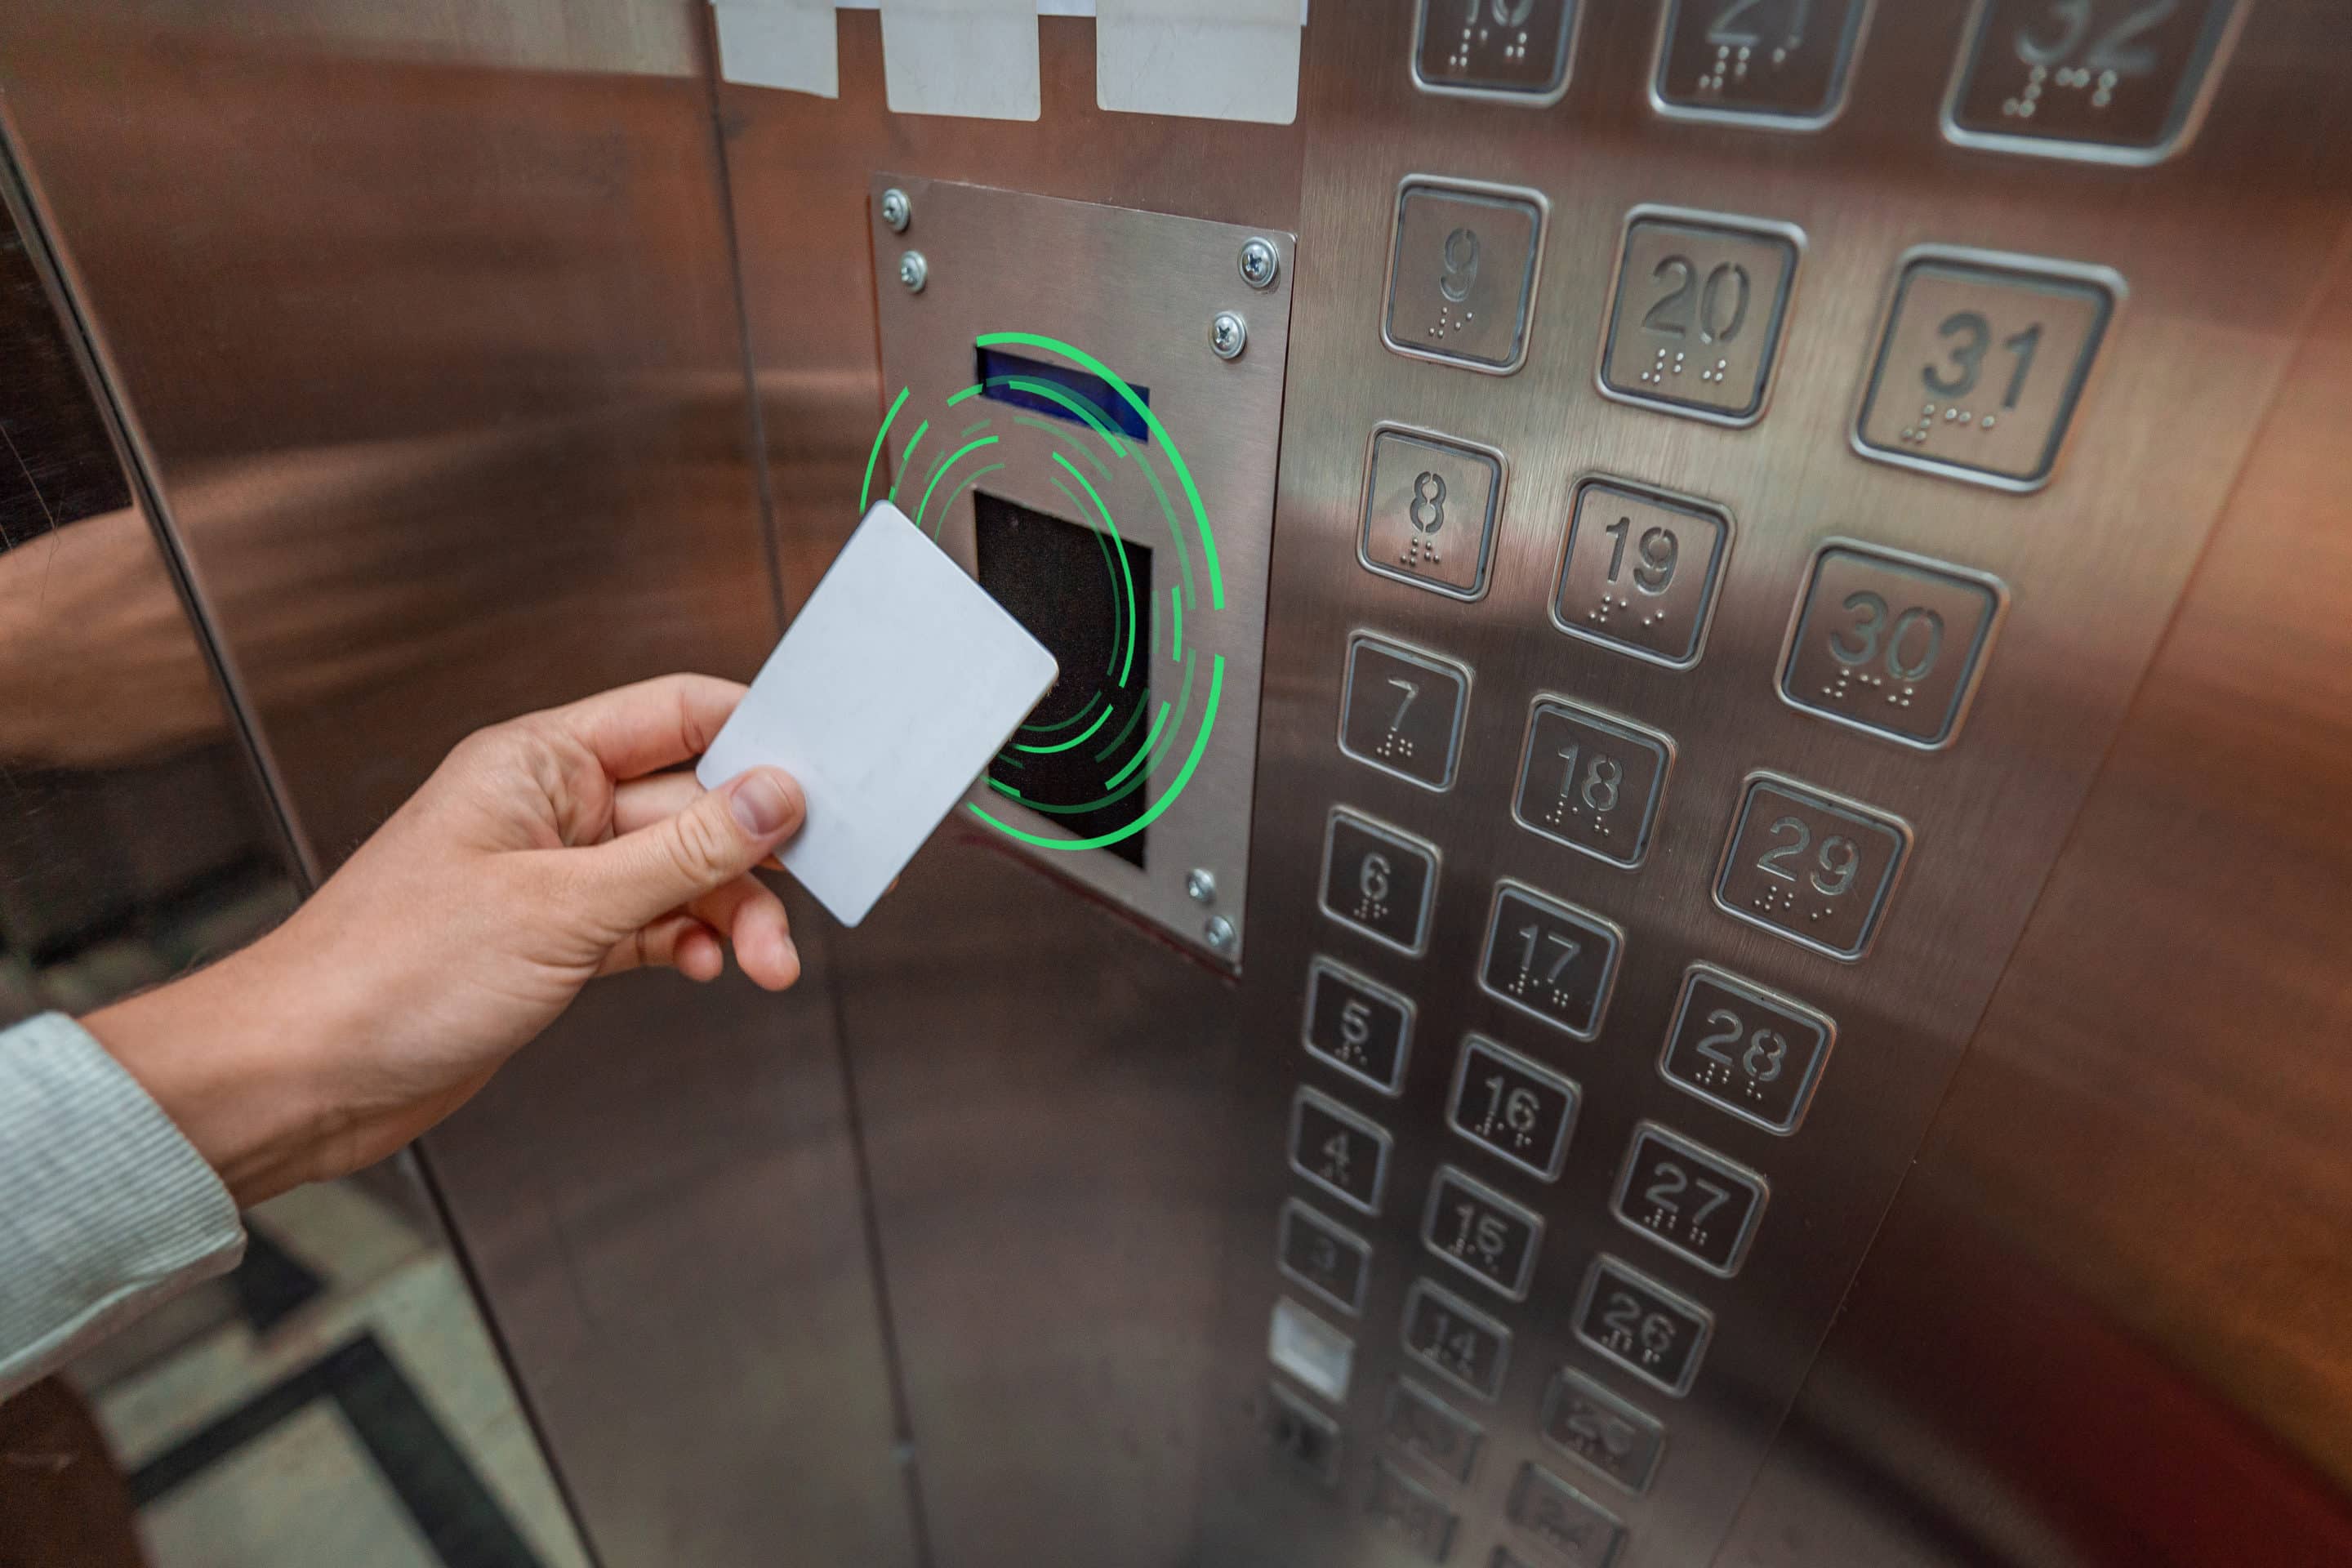 Access control card used in an elevator